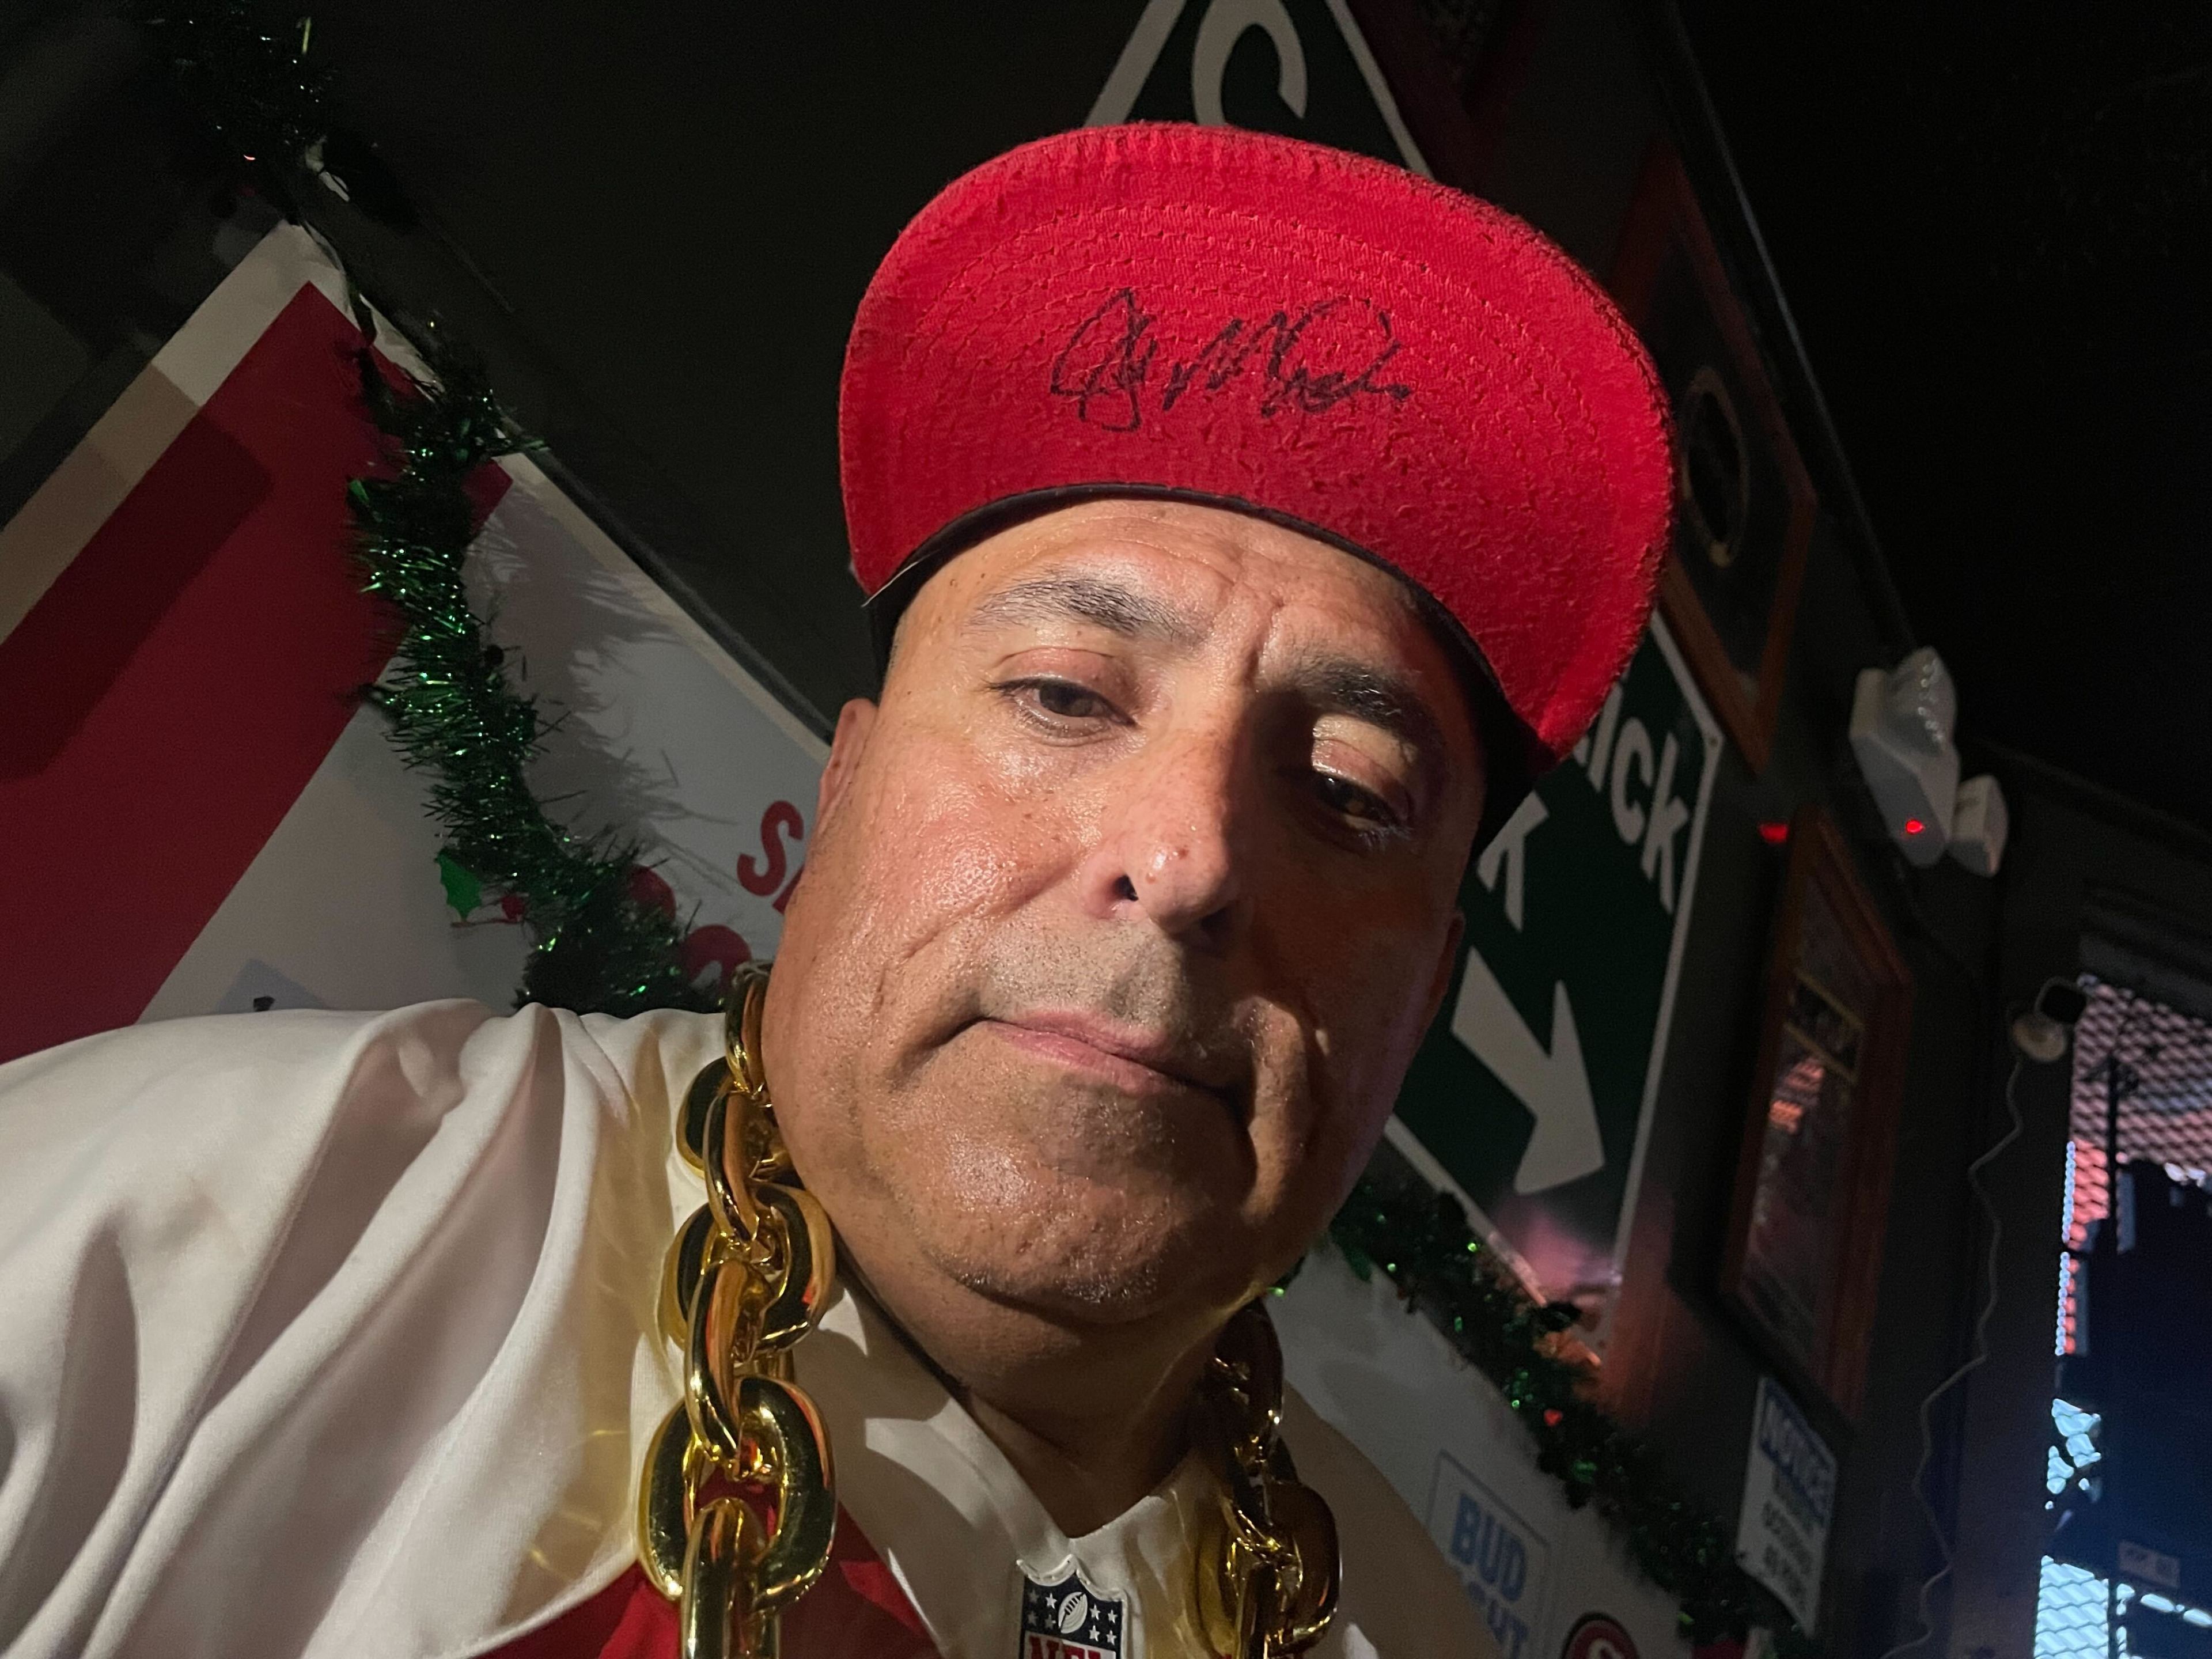 A man in a red cap and gold chain necklace is posing for a selfie with a bar interior background.